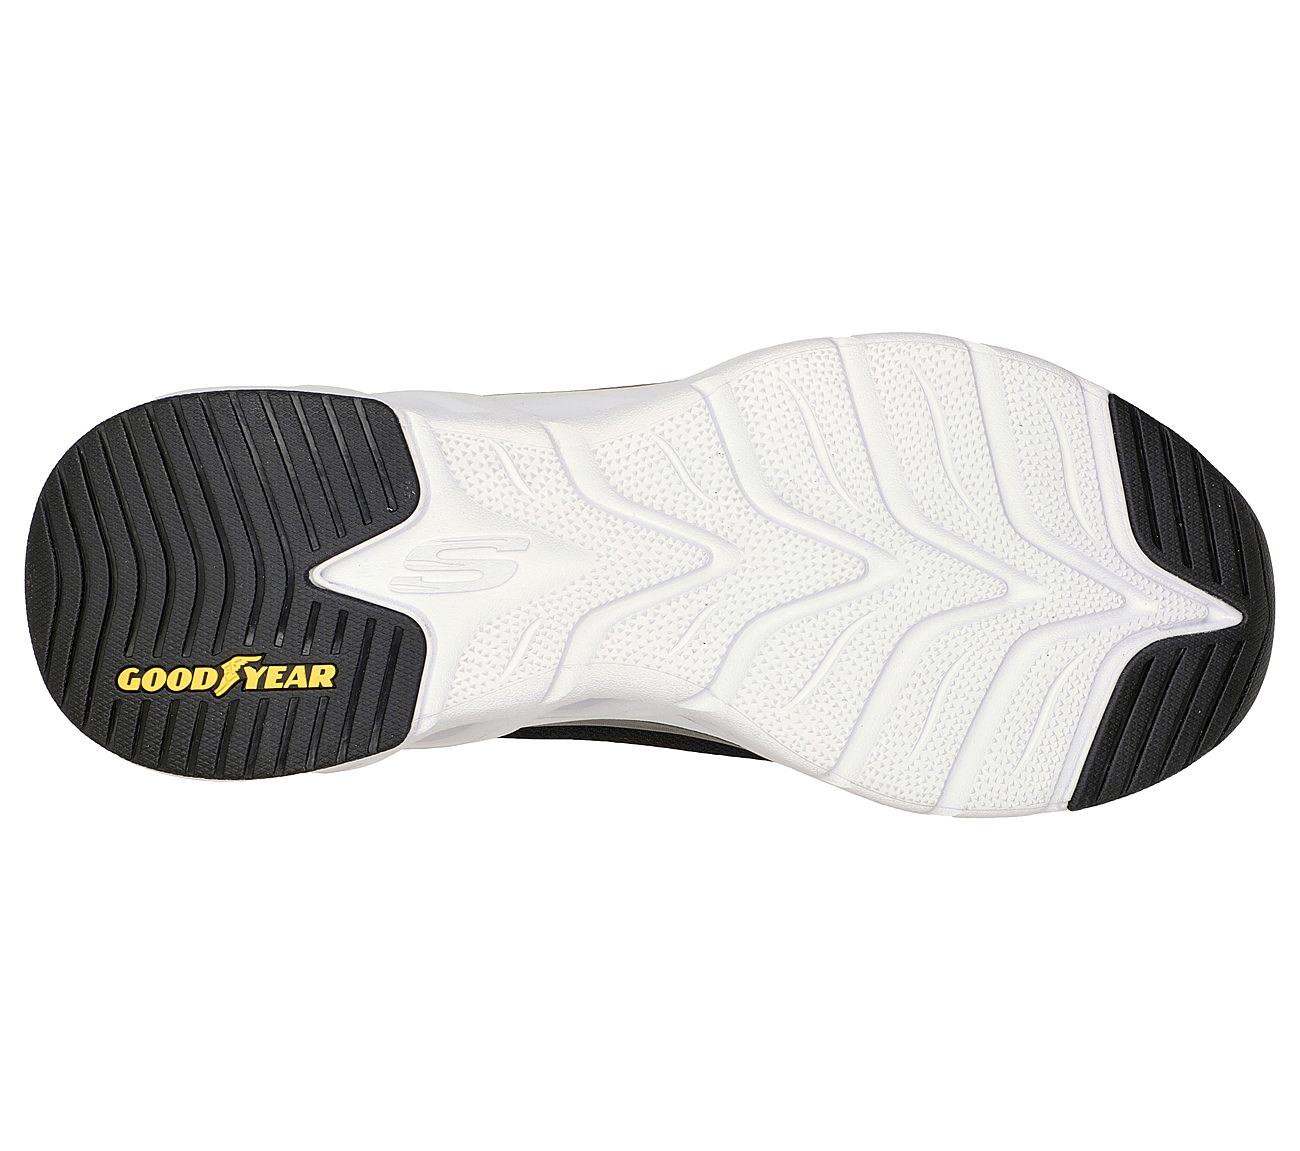 ARCHFITGLIDE-STEP-HIGHLIGHTER, BBBBLACK Footwear Top View